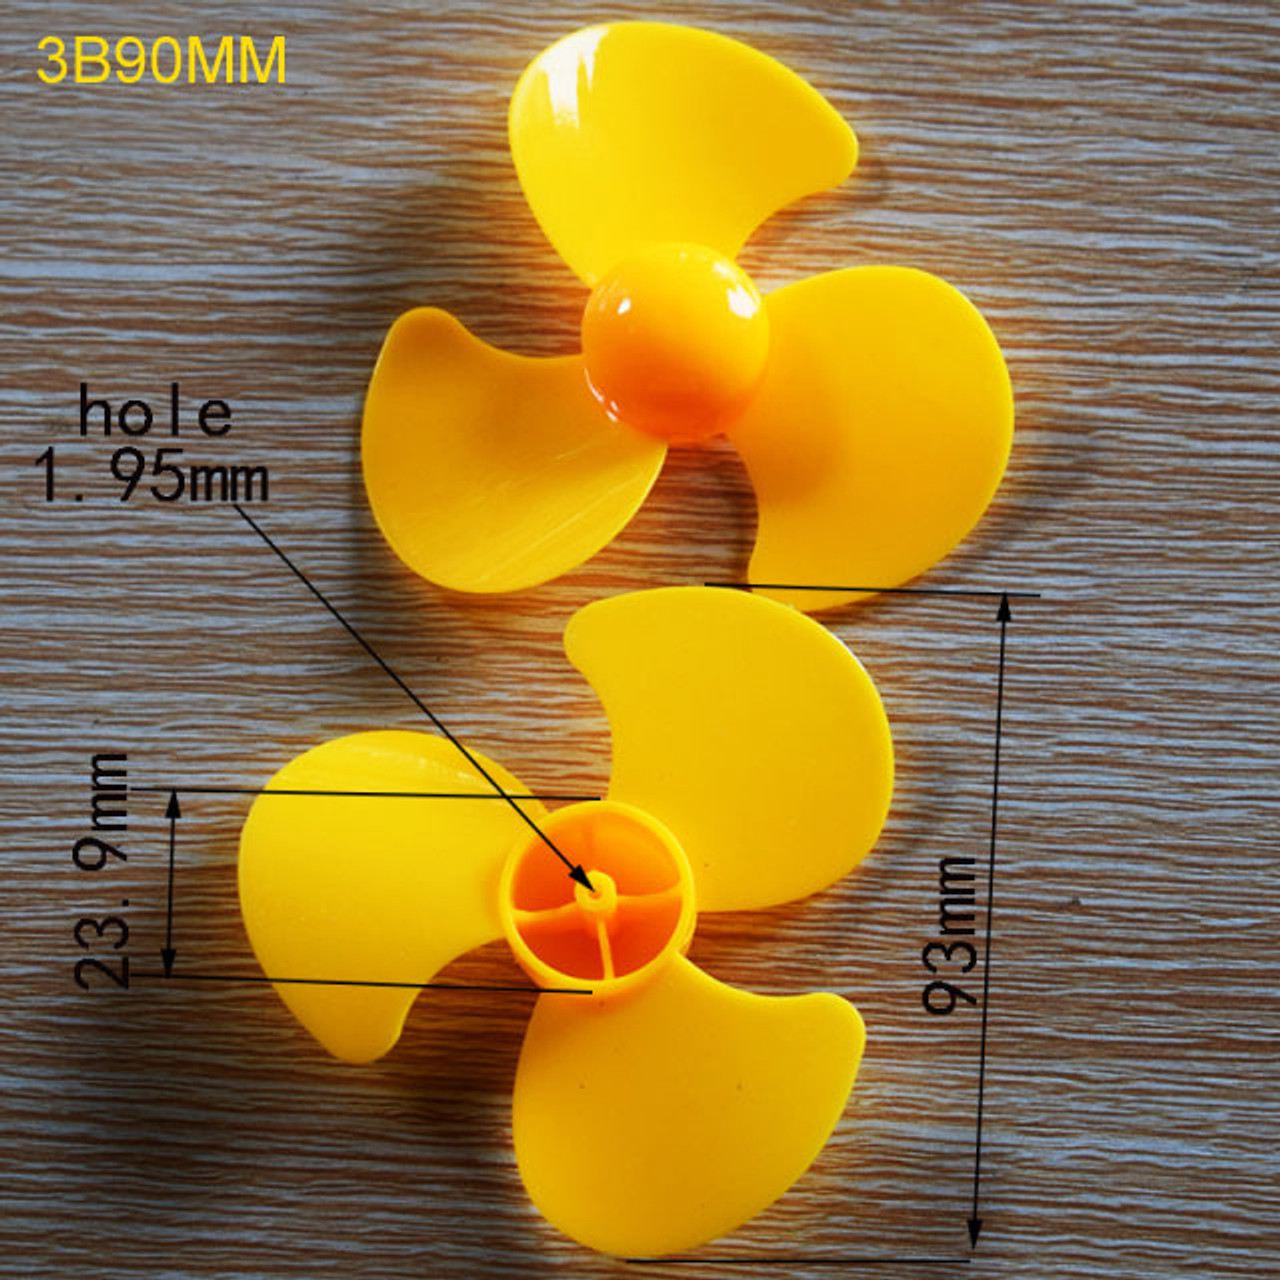 Specifications and size of 3-blade propeller 3B90MM